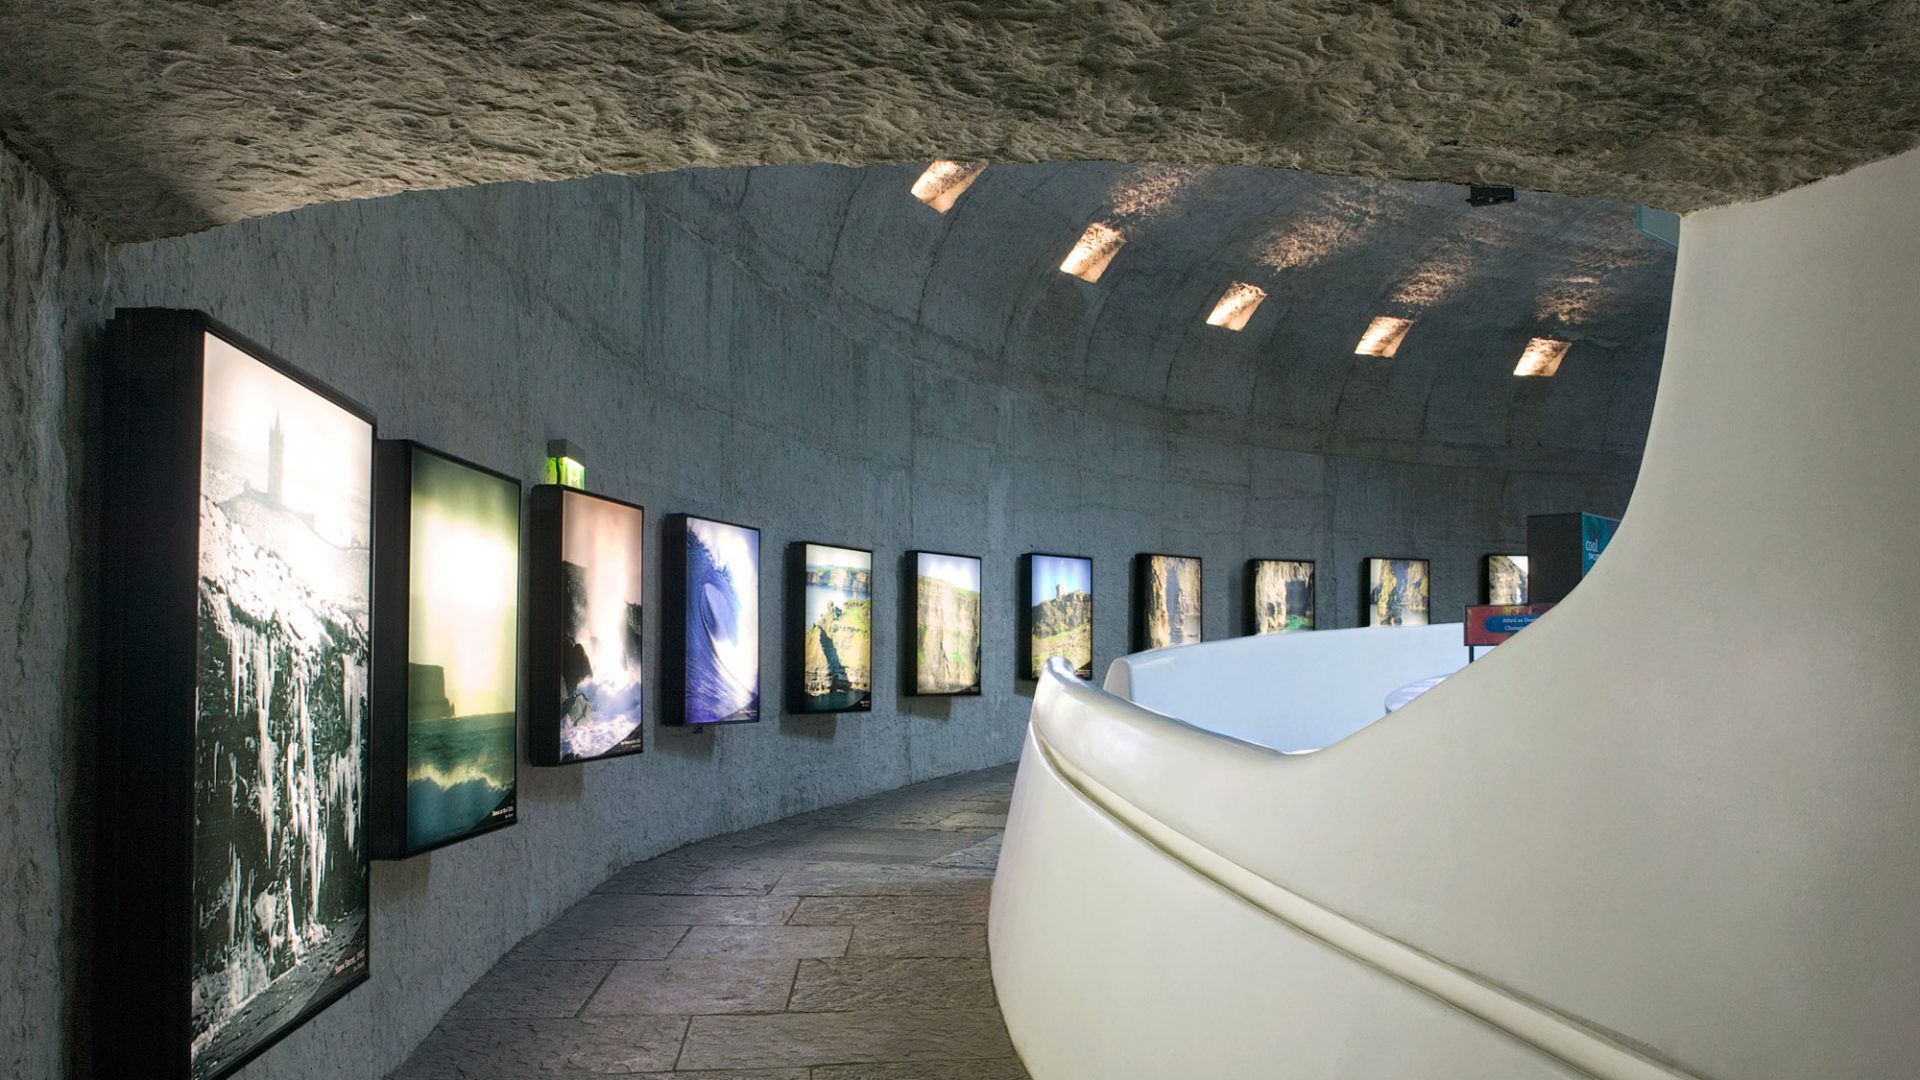 Walkway in the Cliffs of Moher Information Center with digital photography on screens